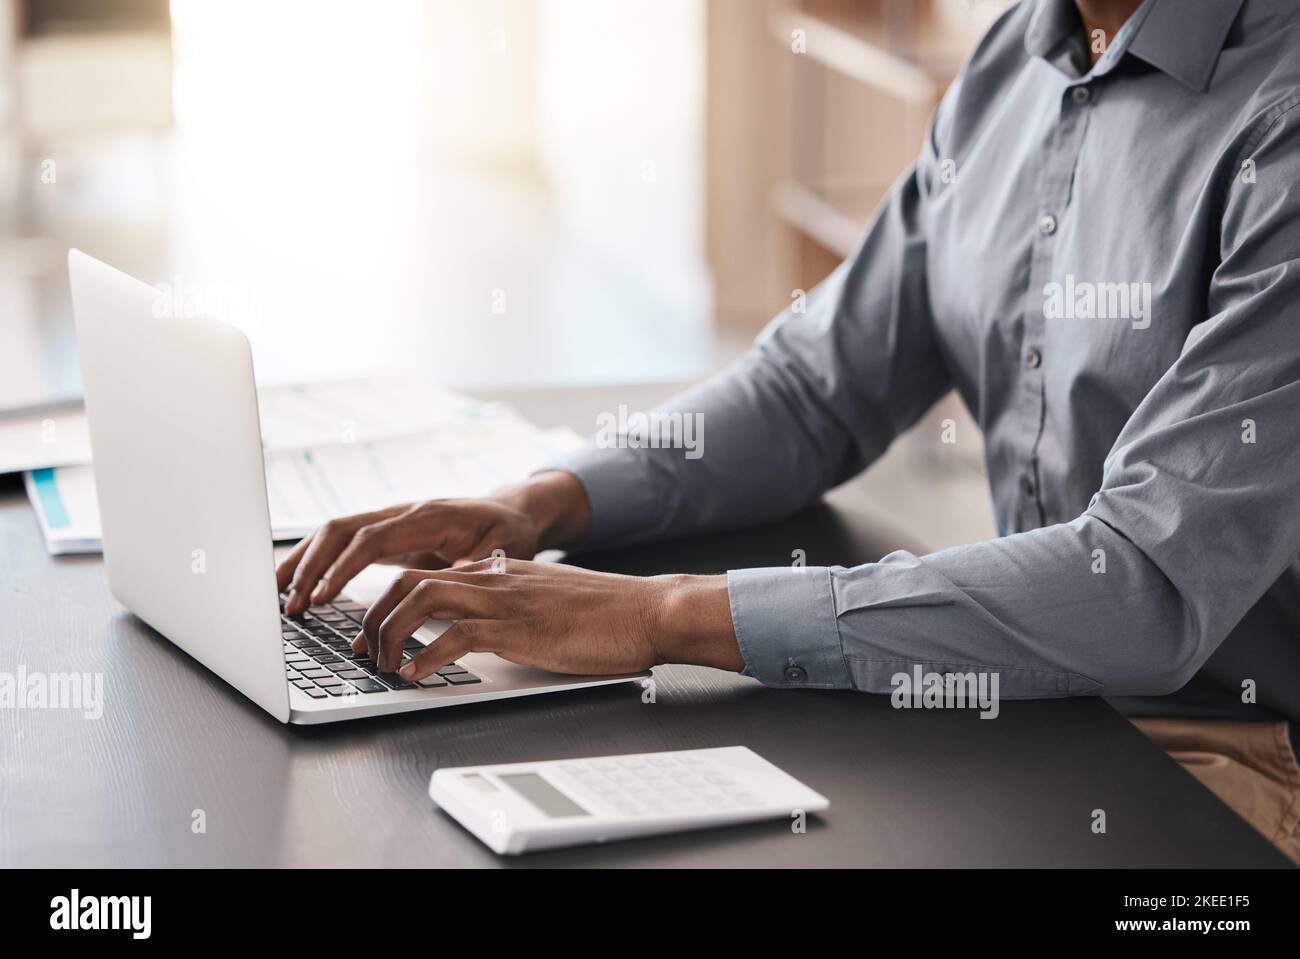 Laptop, hands typing and business man in office working on job email or report. Digital research, developer and programmer writing, programming Stock Photo